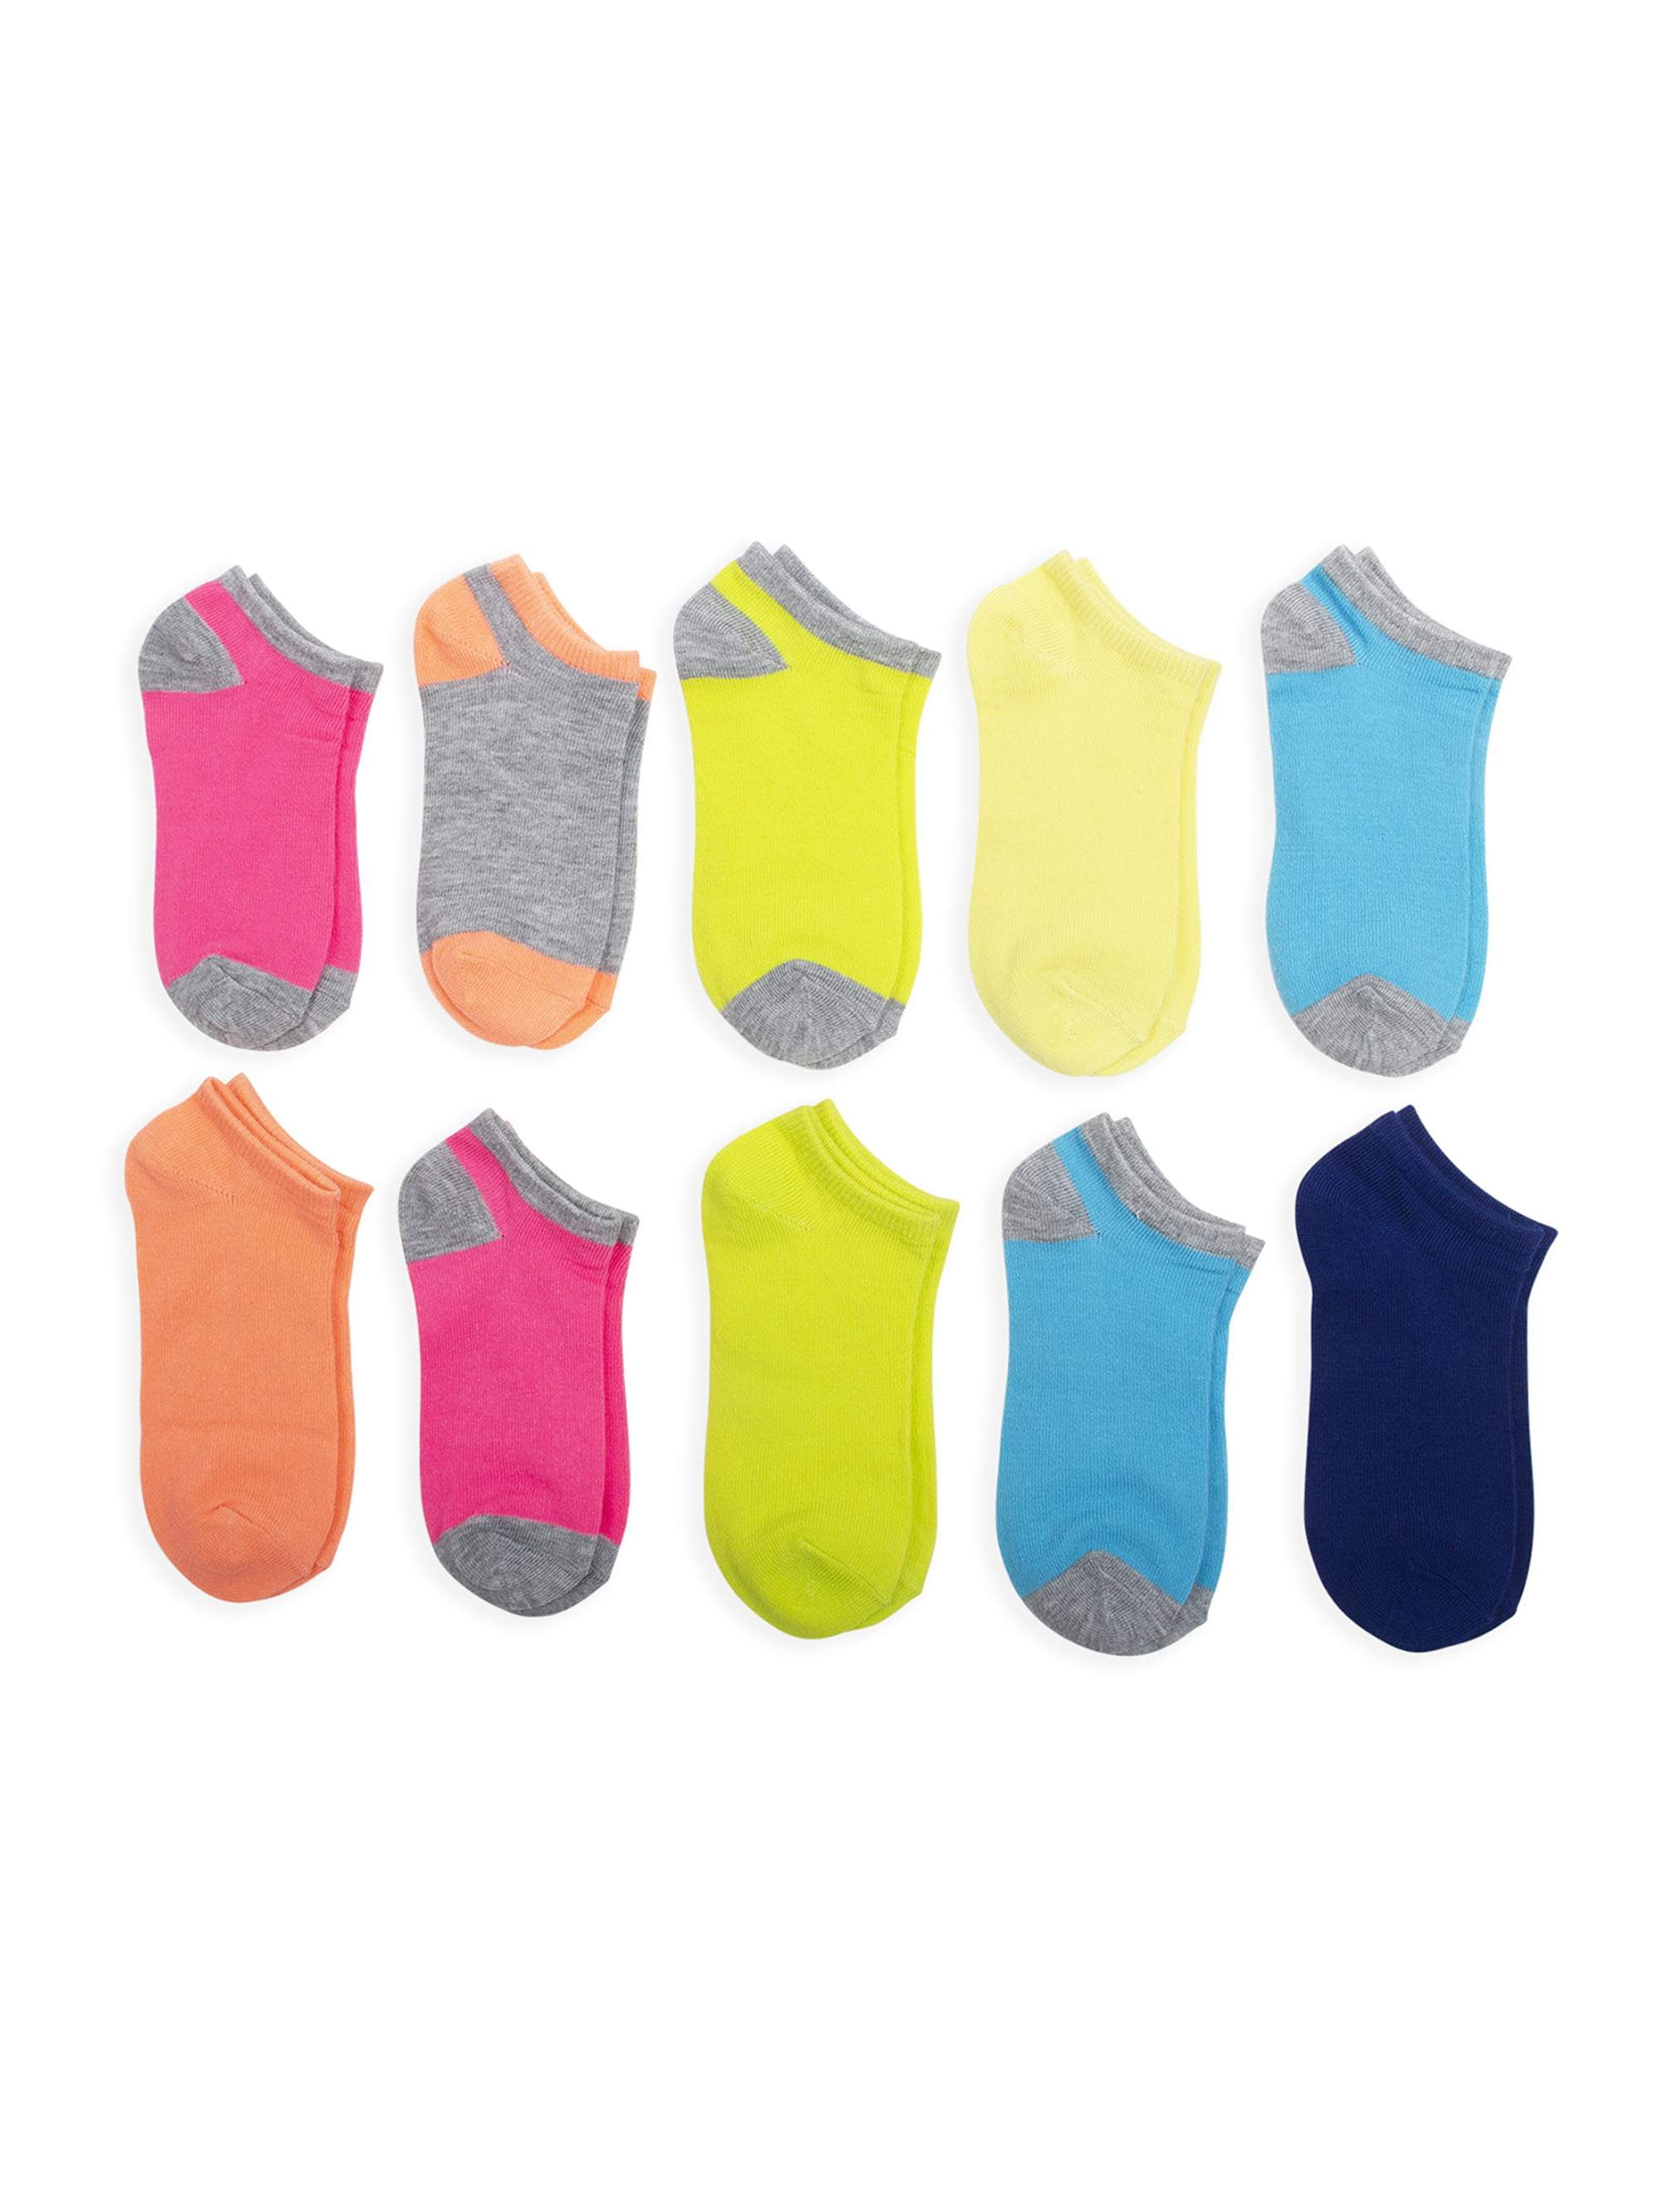 Ladies 5 Pack Side By Side Design Socks Coloured Bright Cotton Rich Premium Size 4-8